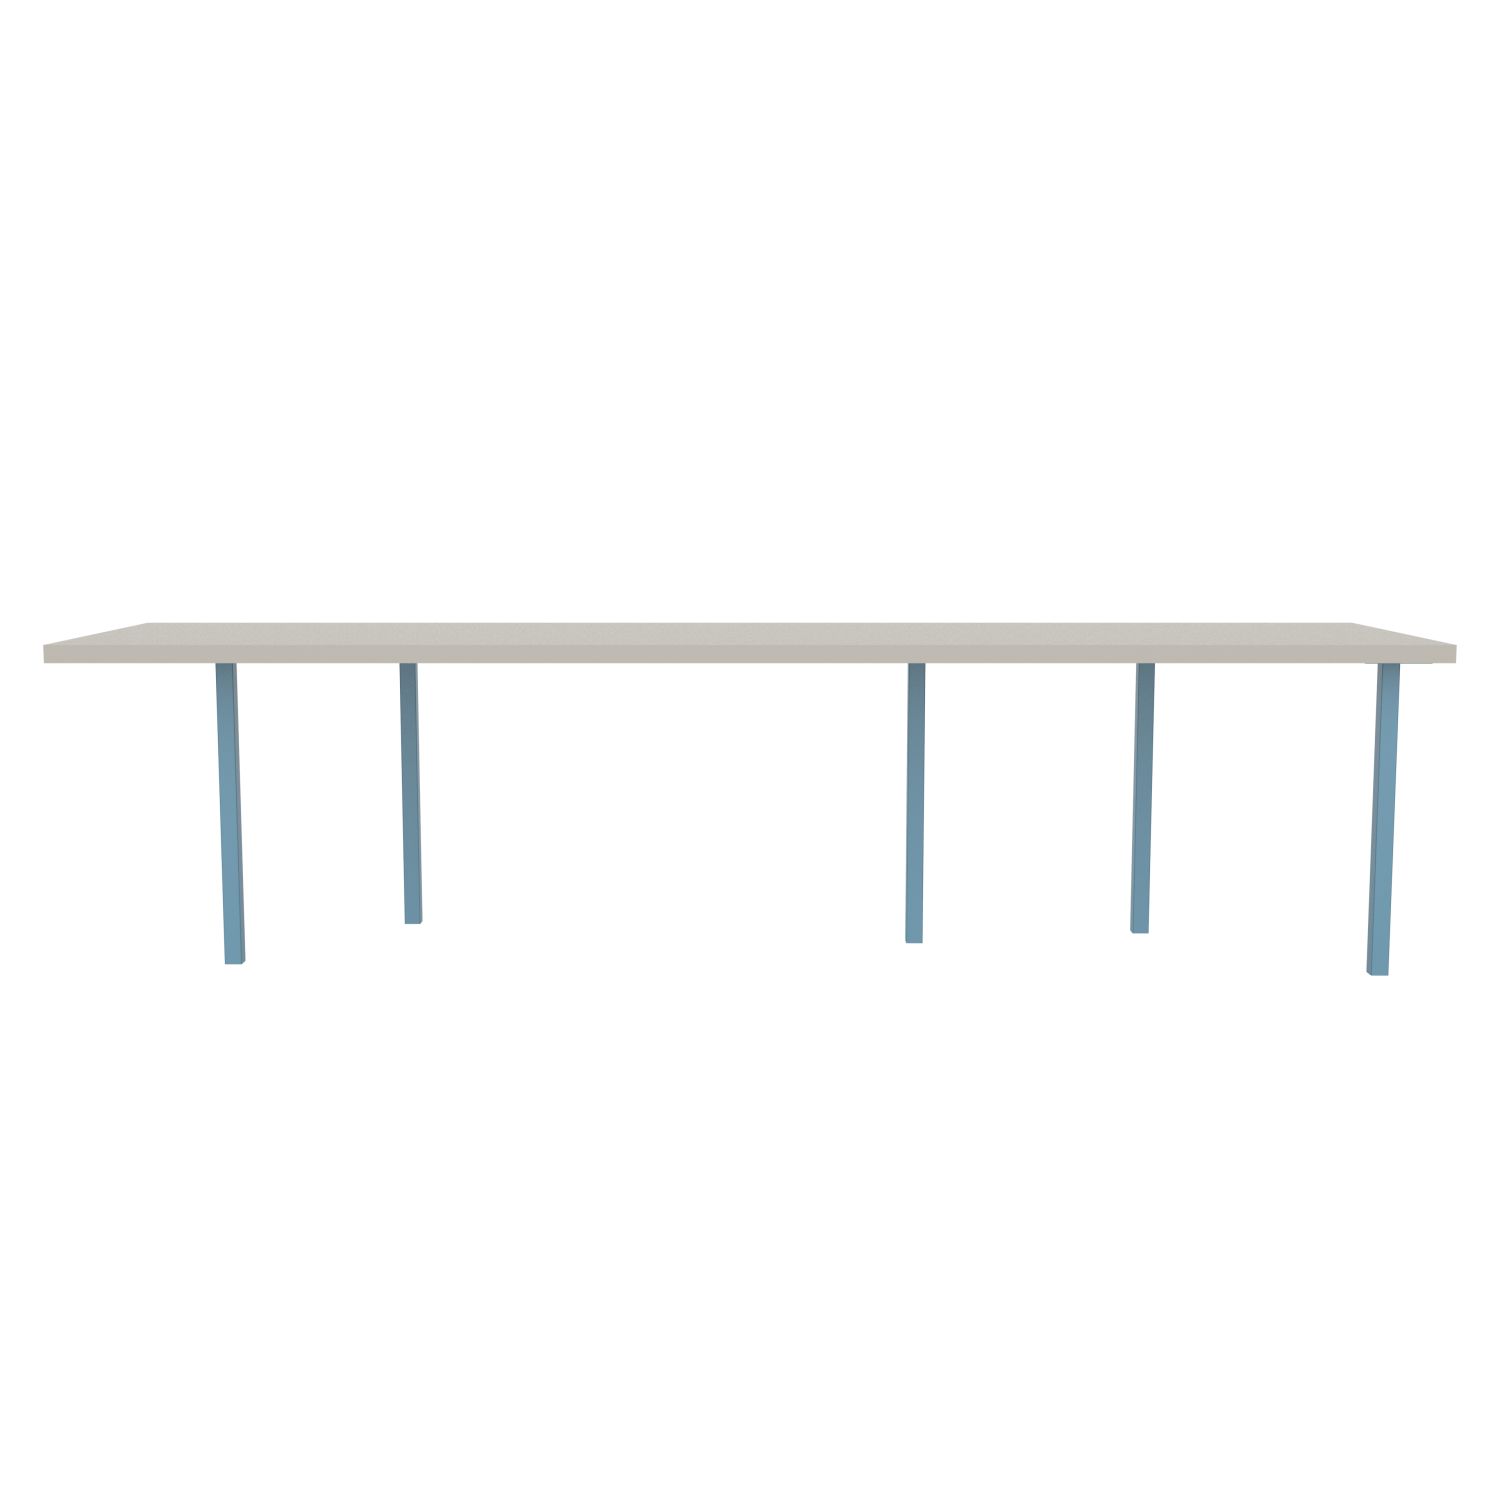 lensvelt bbrand table five fixed heigt 80x310 hpl white 50 mm price level 1 blue ral5024